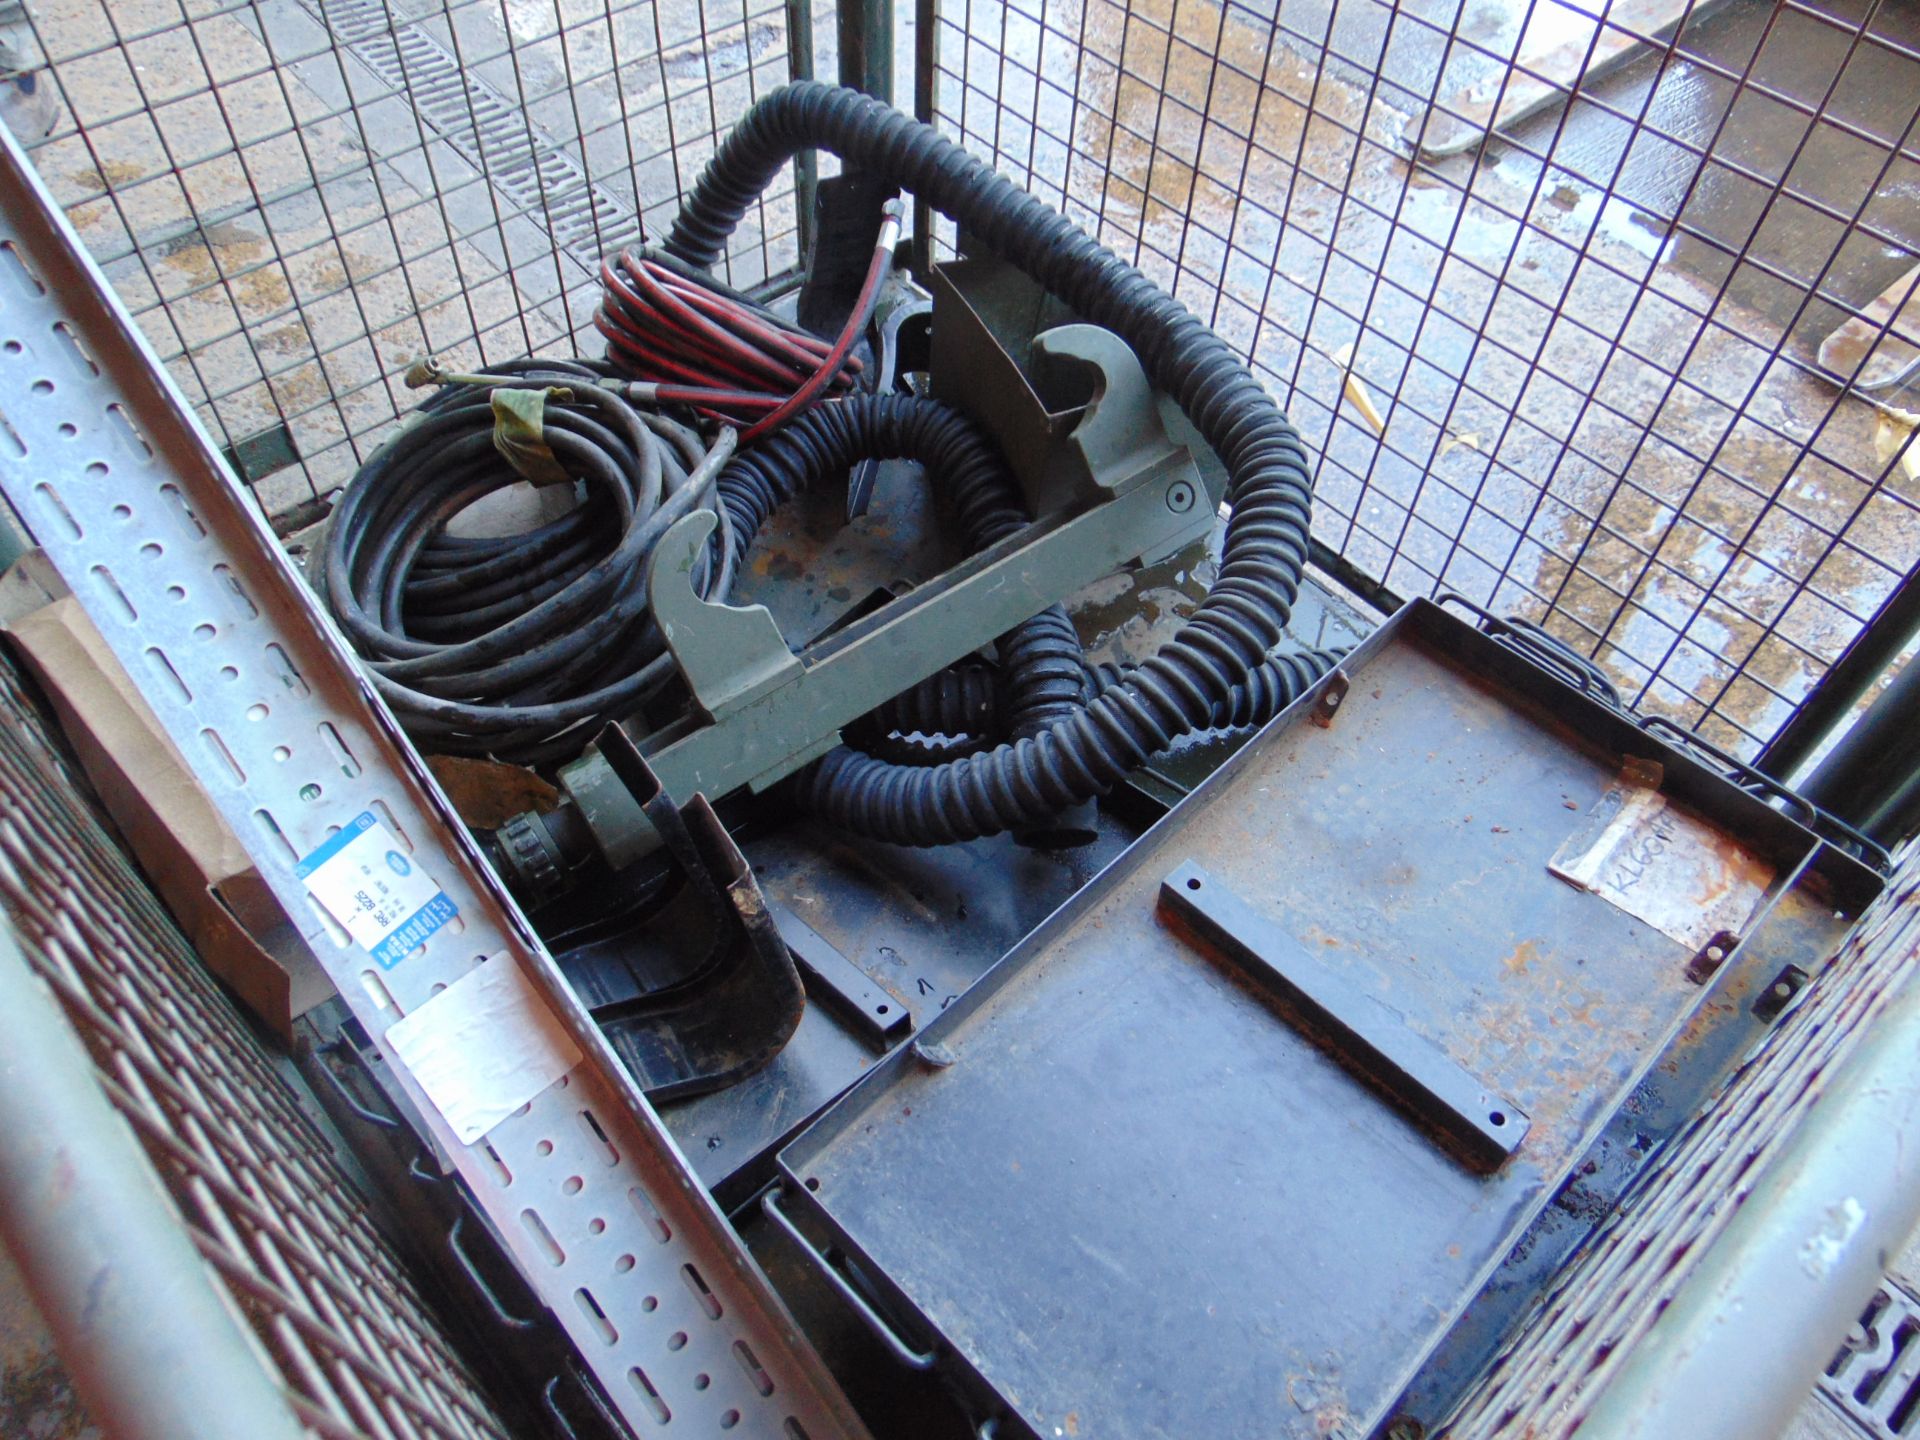 1 x Stillage of Track Clamps, Air Lines, Land Rover Battery Trays, Weapon Tray etc - Image 4 of 8